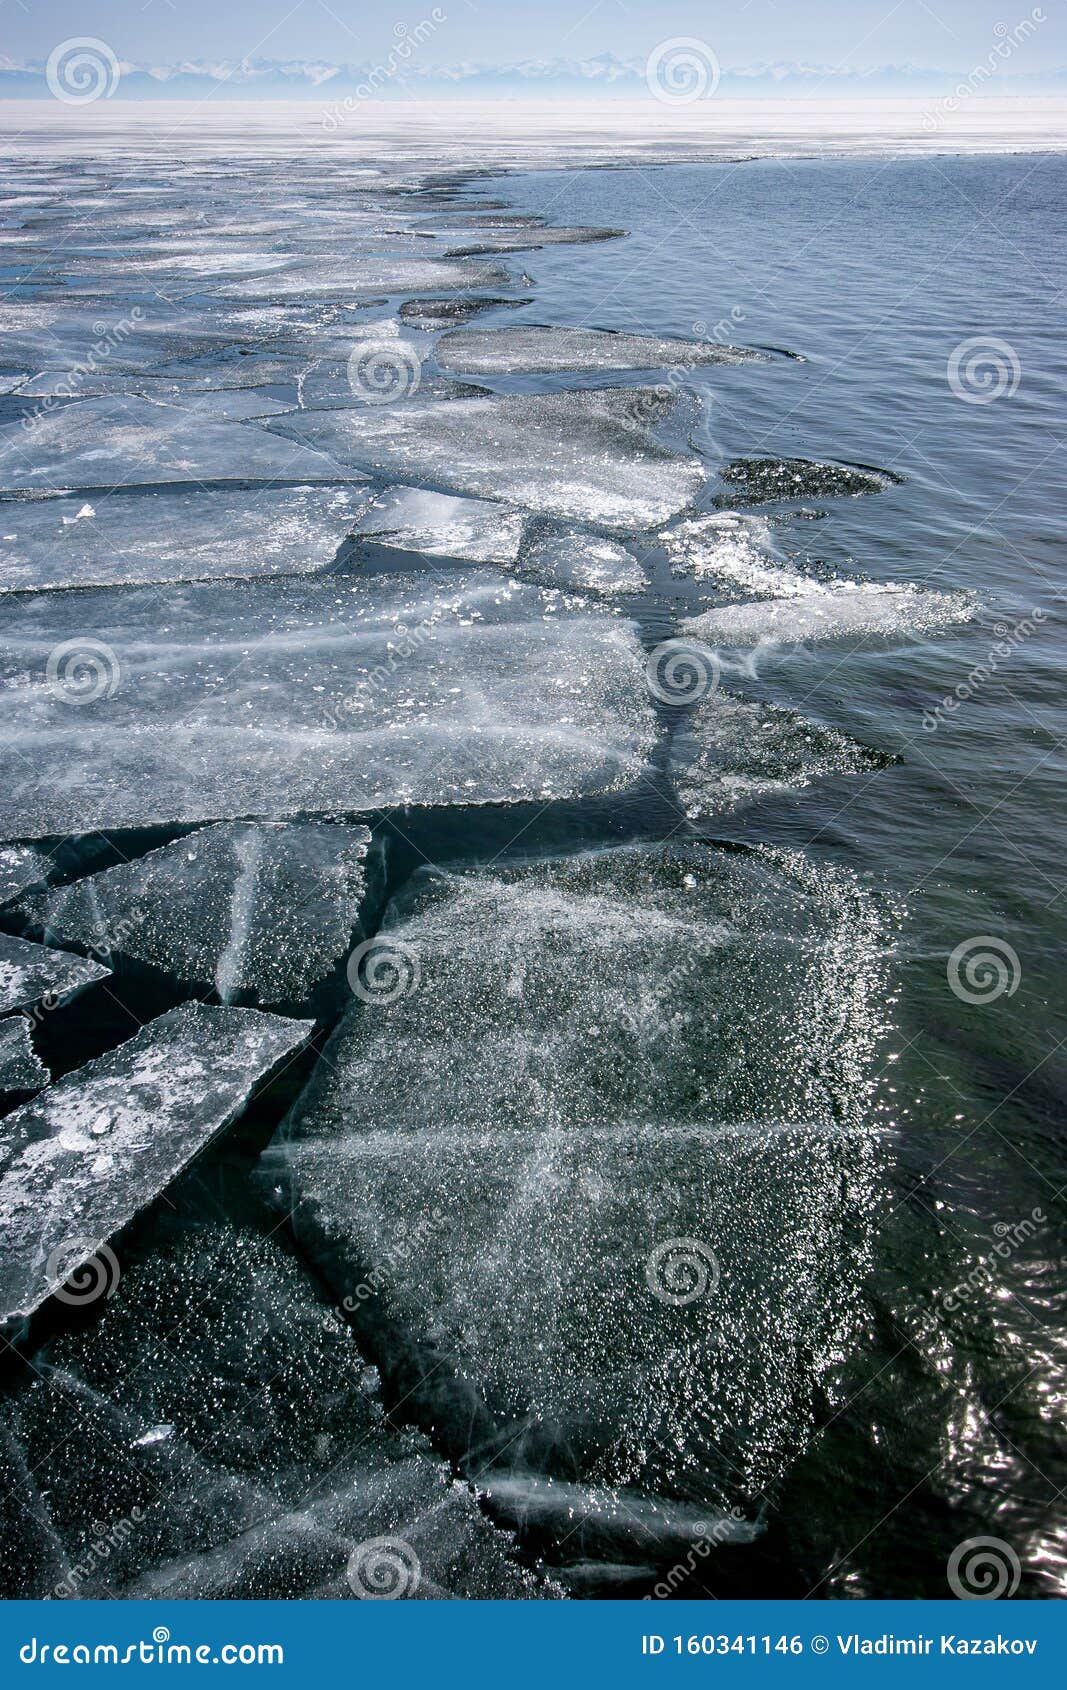 lake baikal in winter with open water and the edge of broken ice